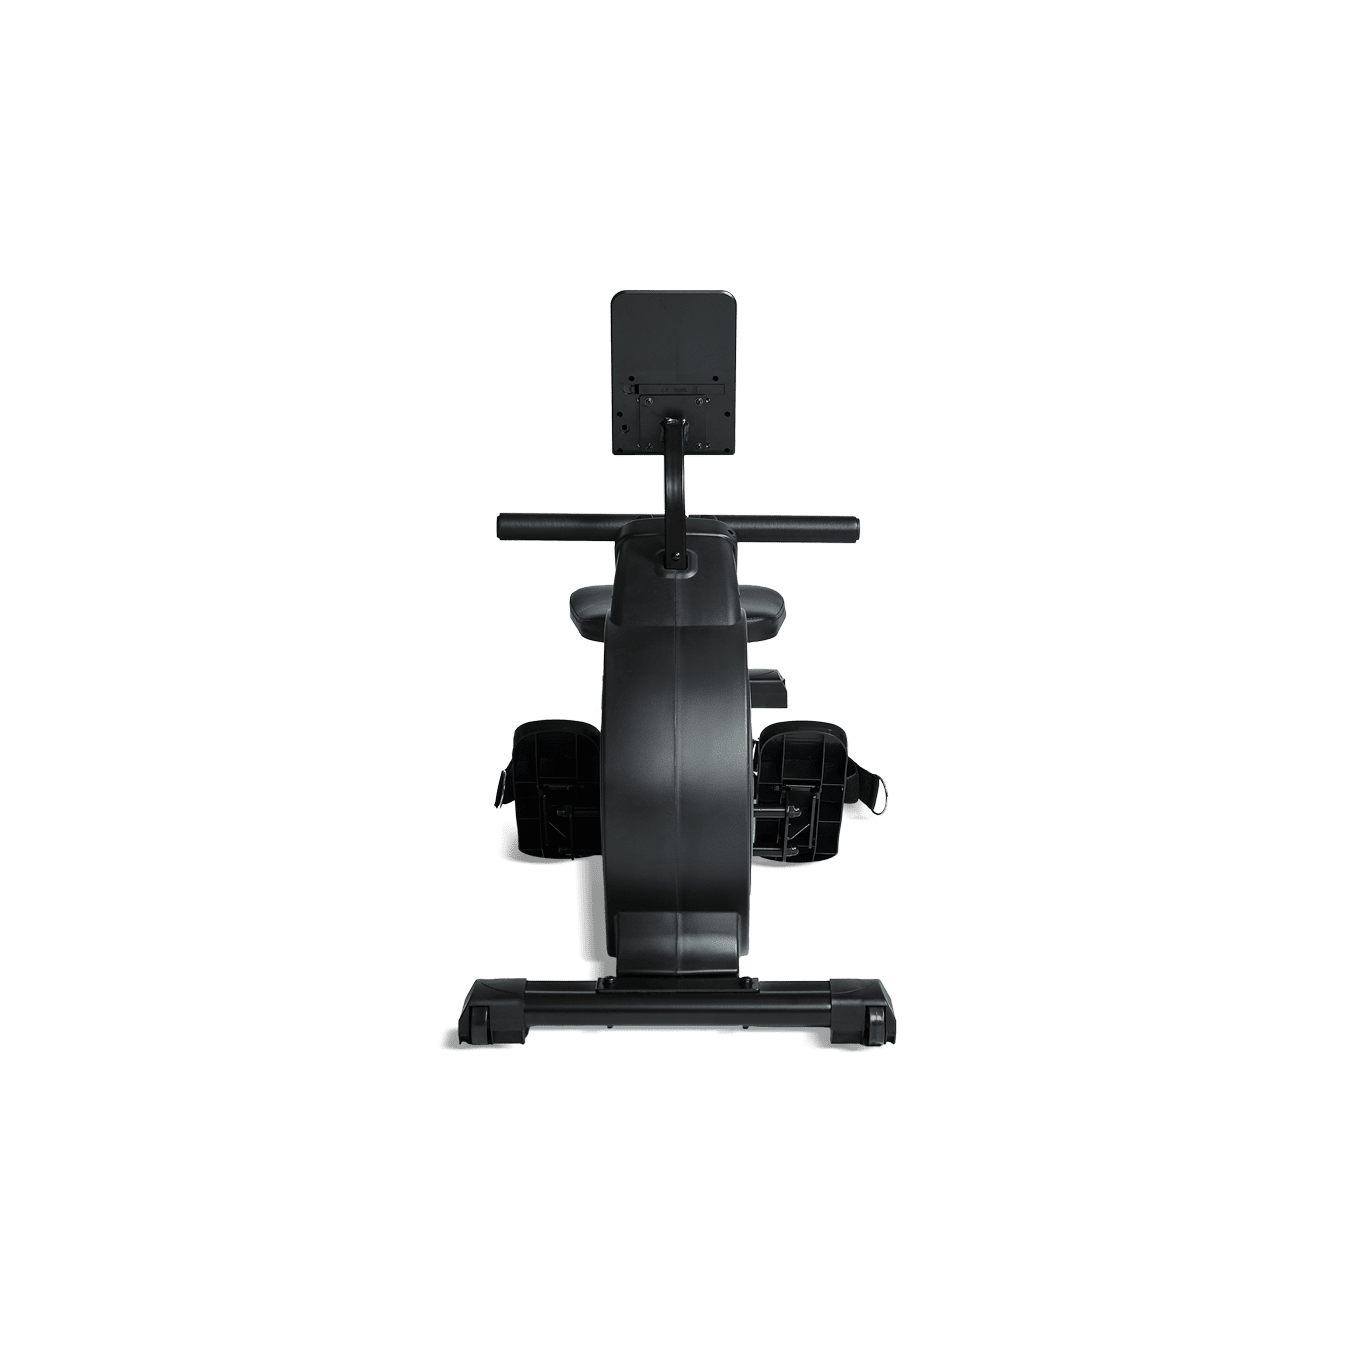 Ascend R-100 Magnetic Rower